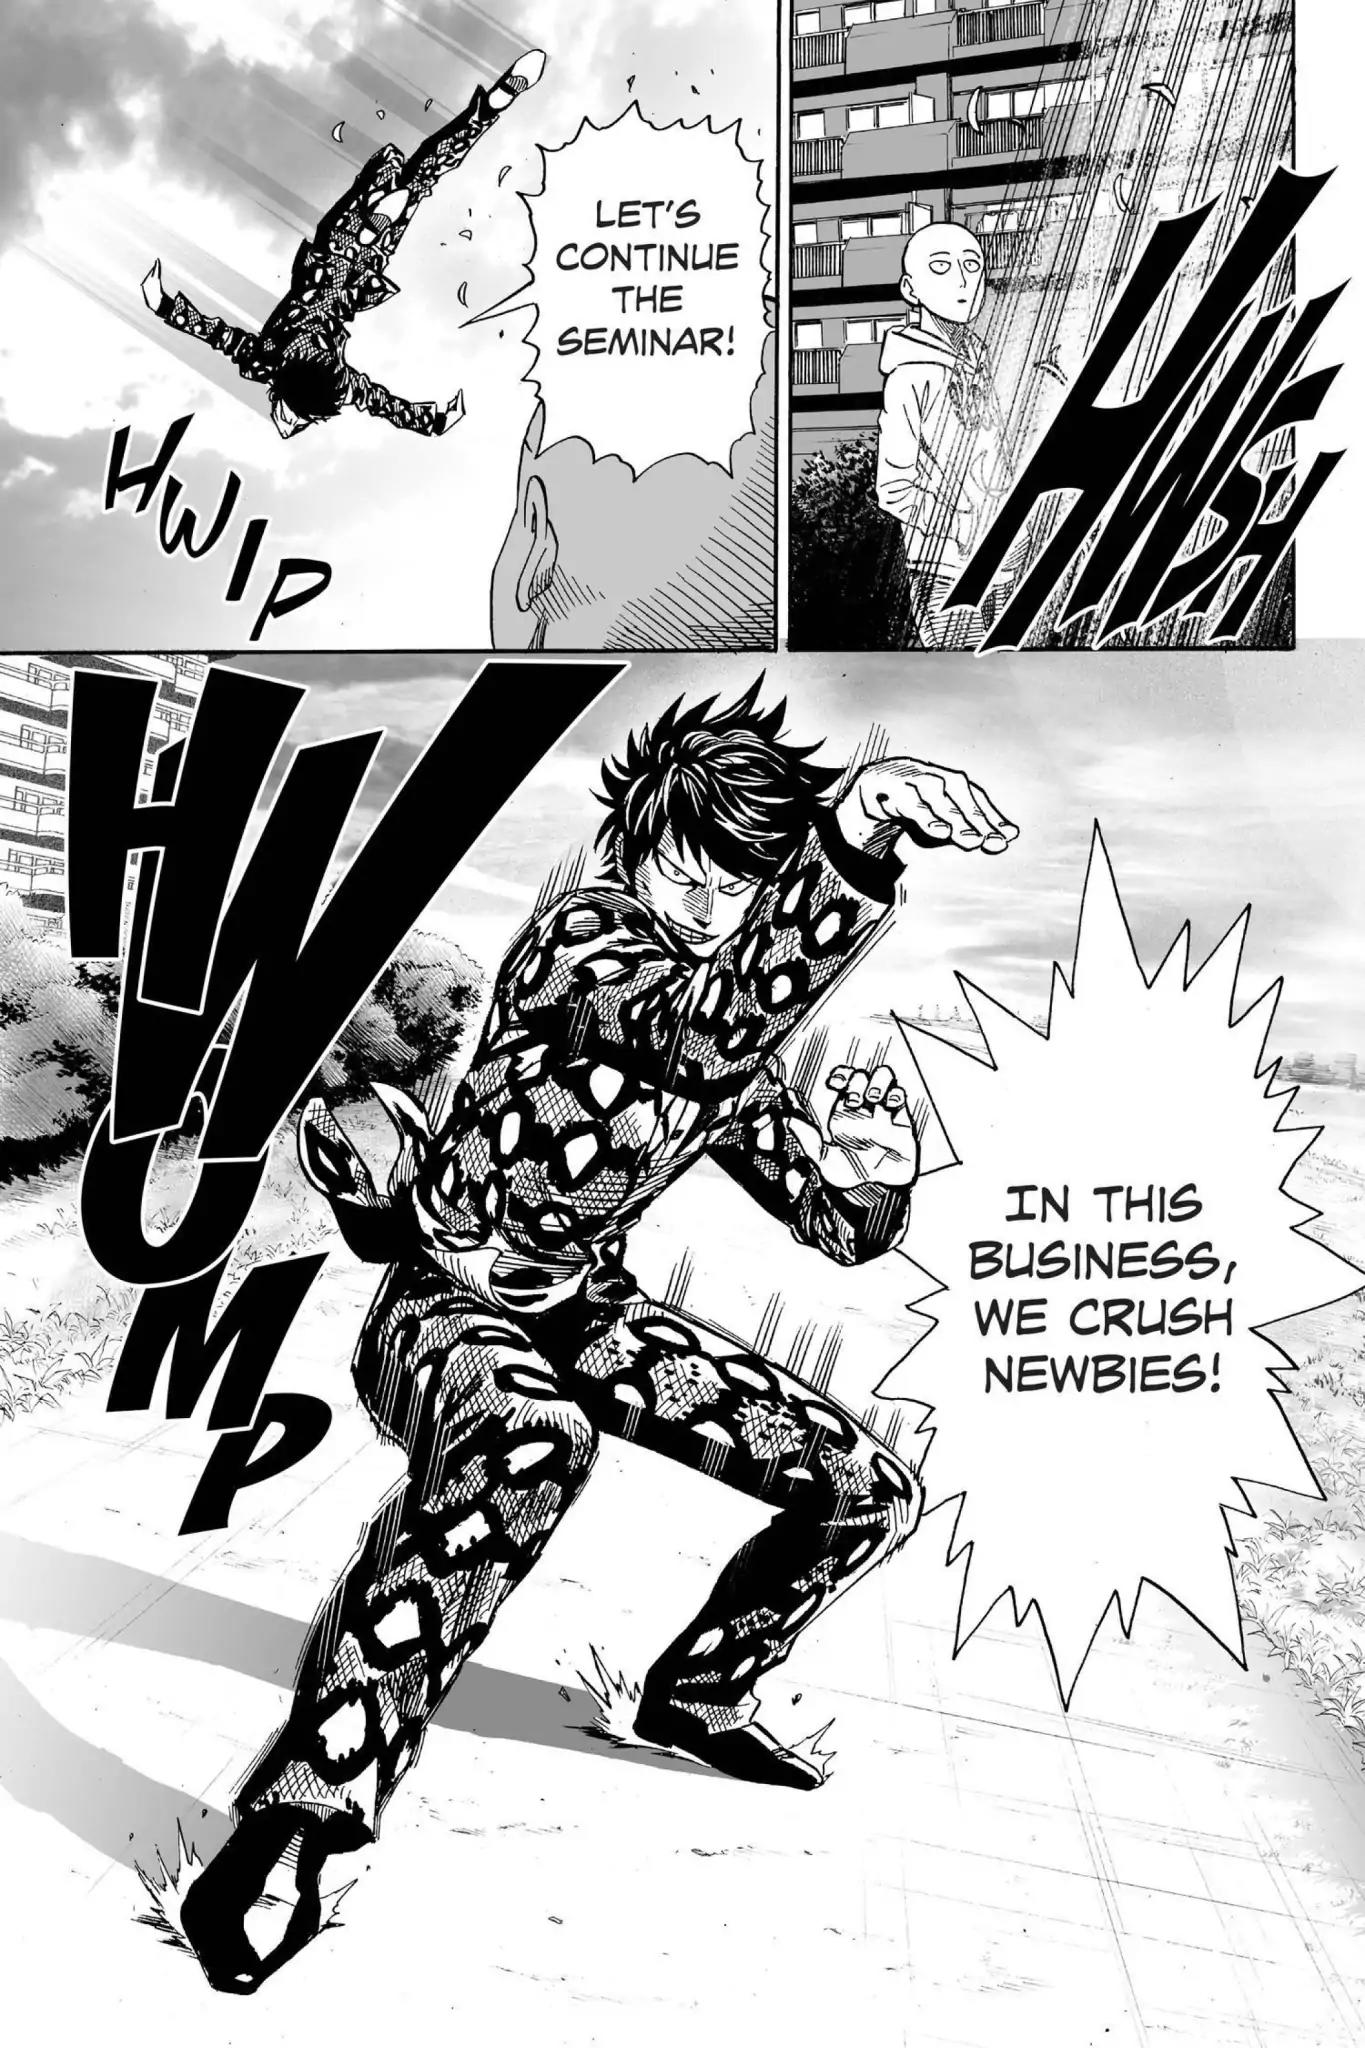 One Punch Man, Chapter 16 I Passed image 27